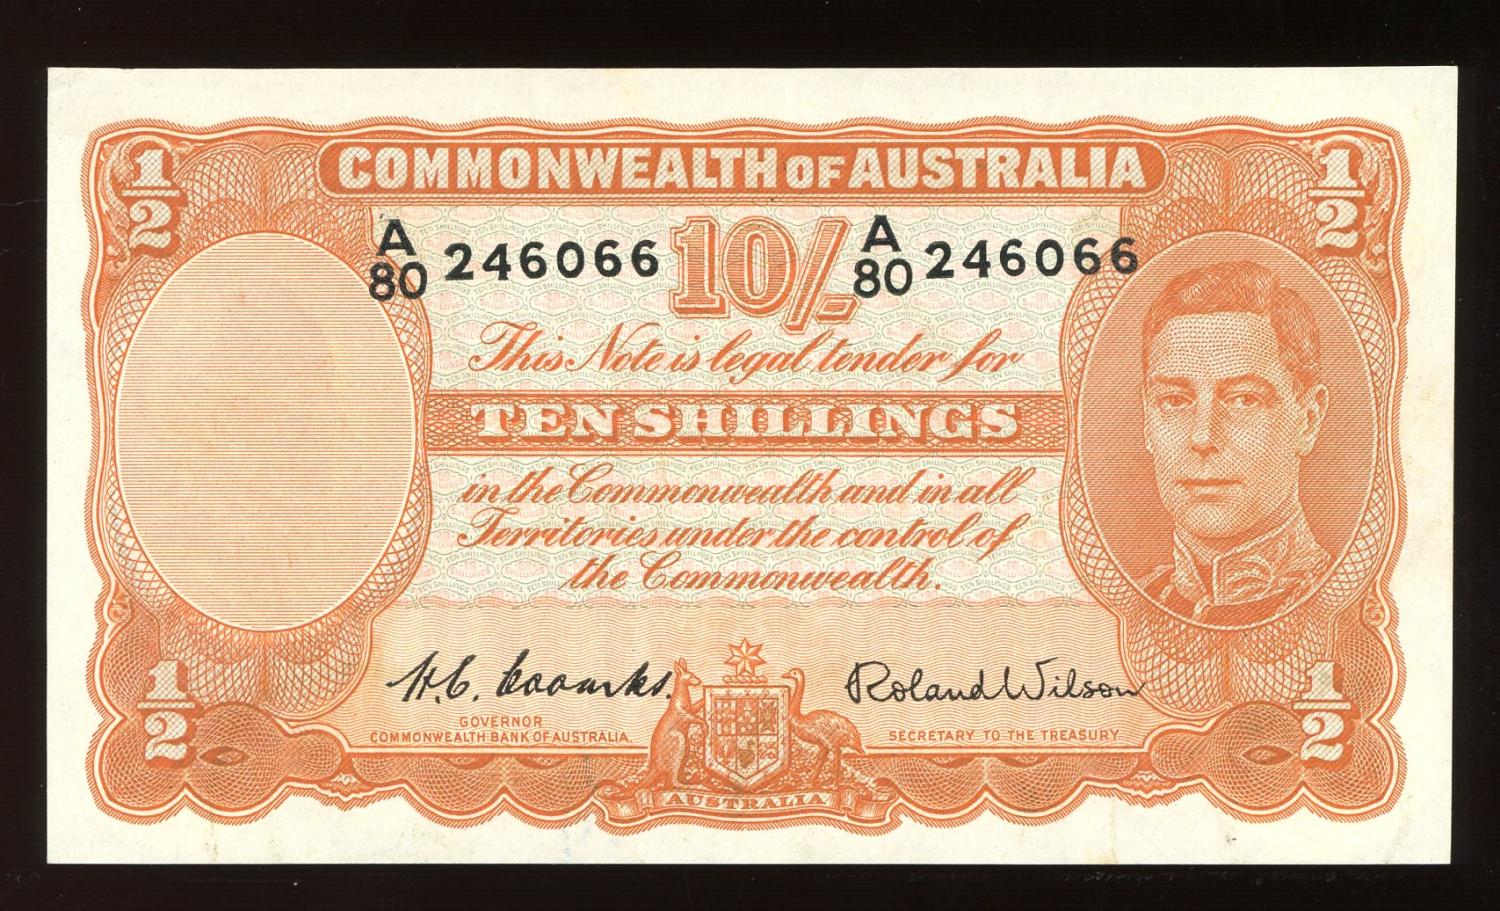 Thumbnail for 1952 Ten Shilling Banknote Coombs Wilson A80 246066 EF